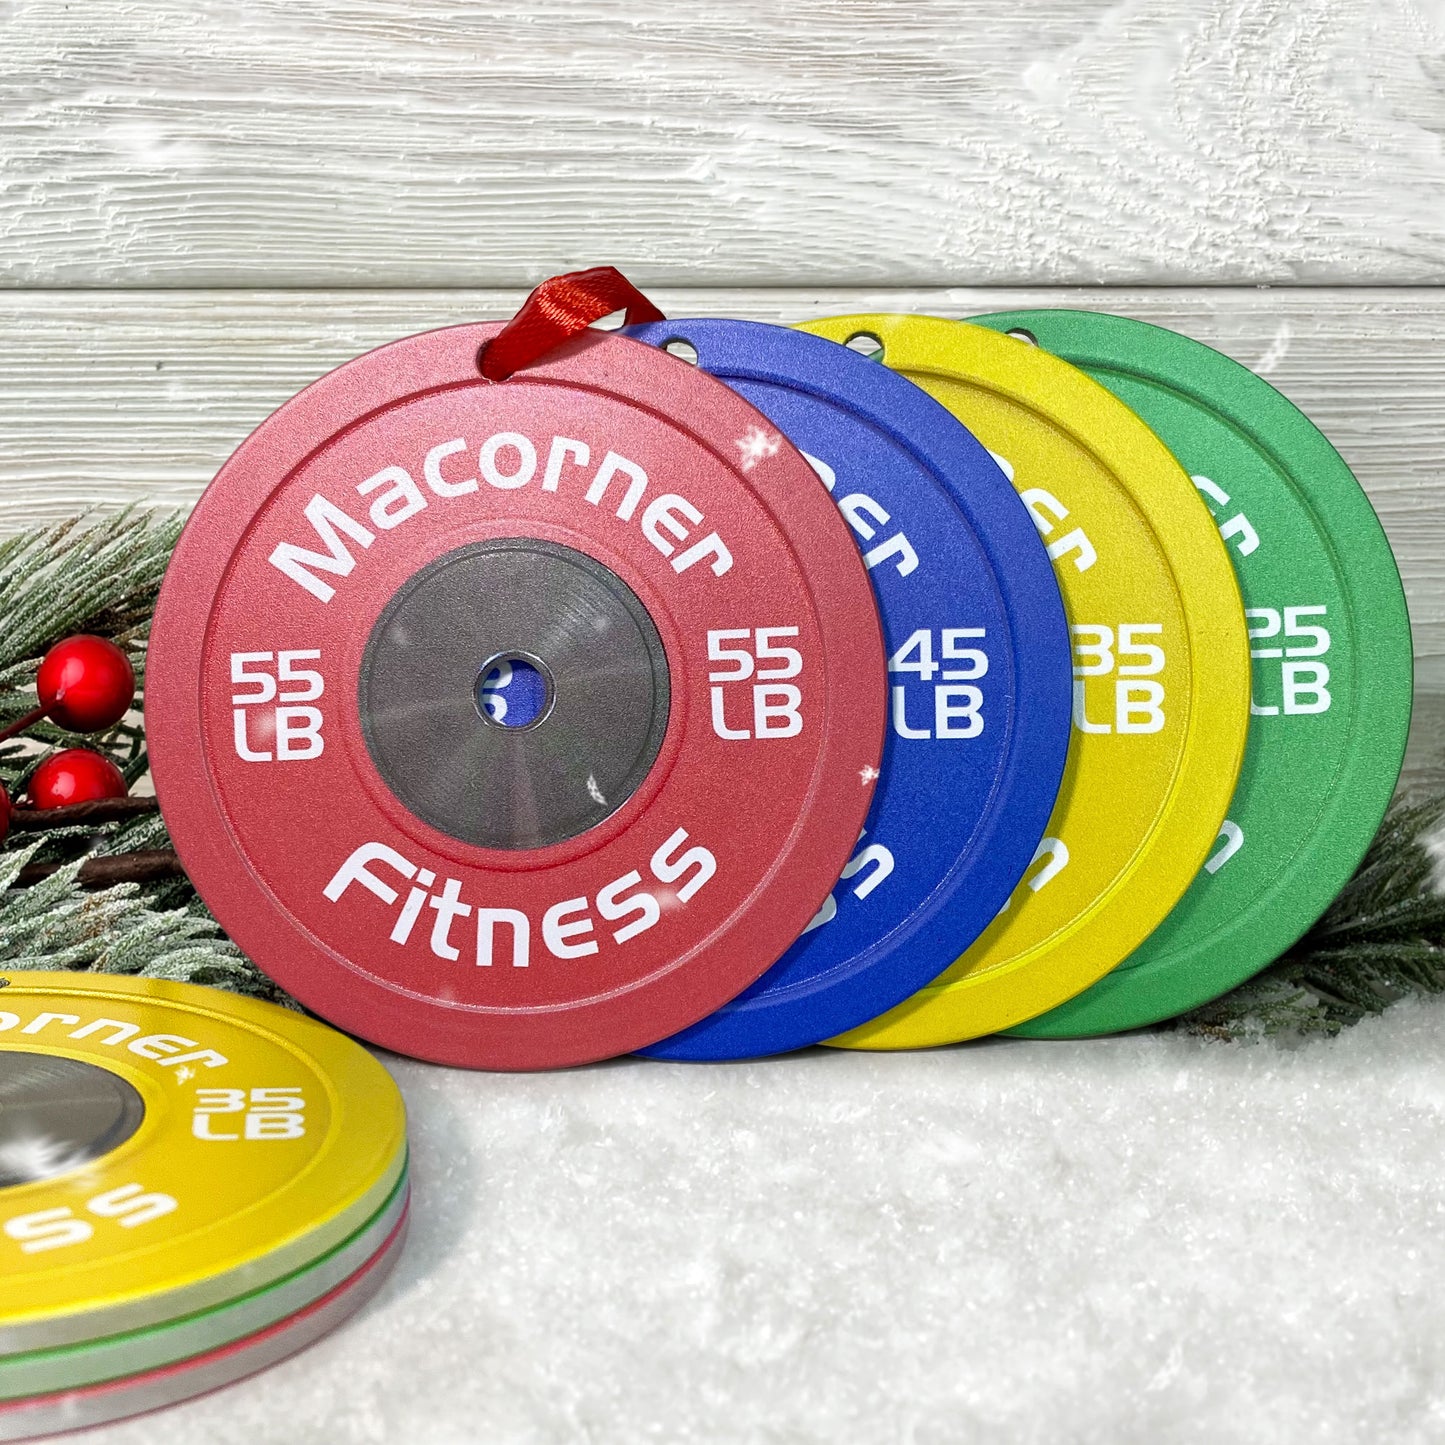 Bumper Plate - Personalized Two-Sided Aluminum Ornament